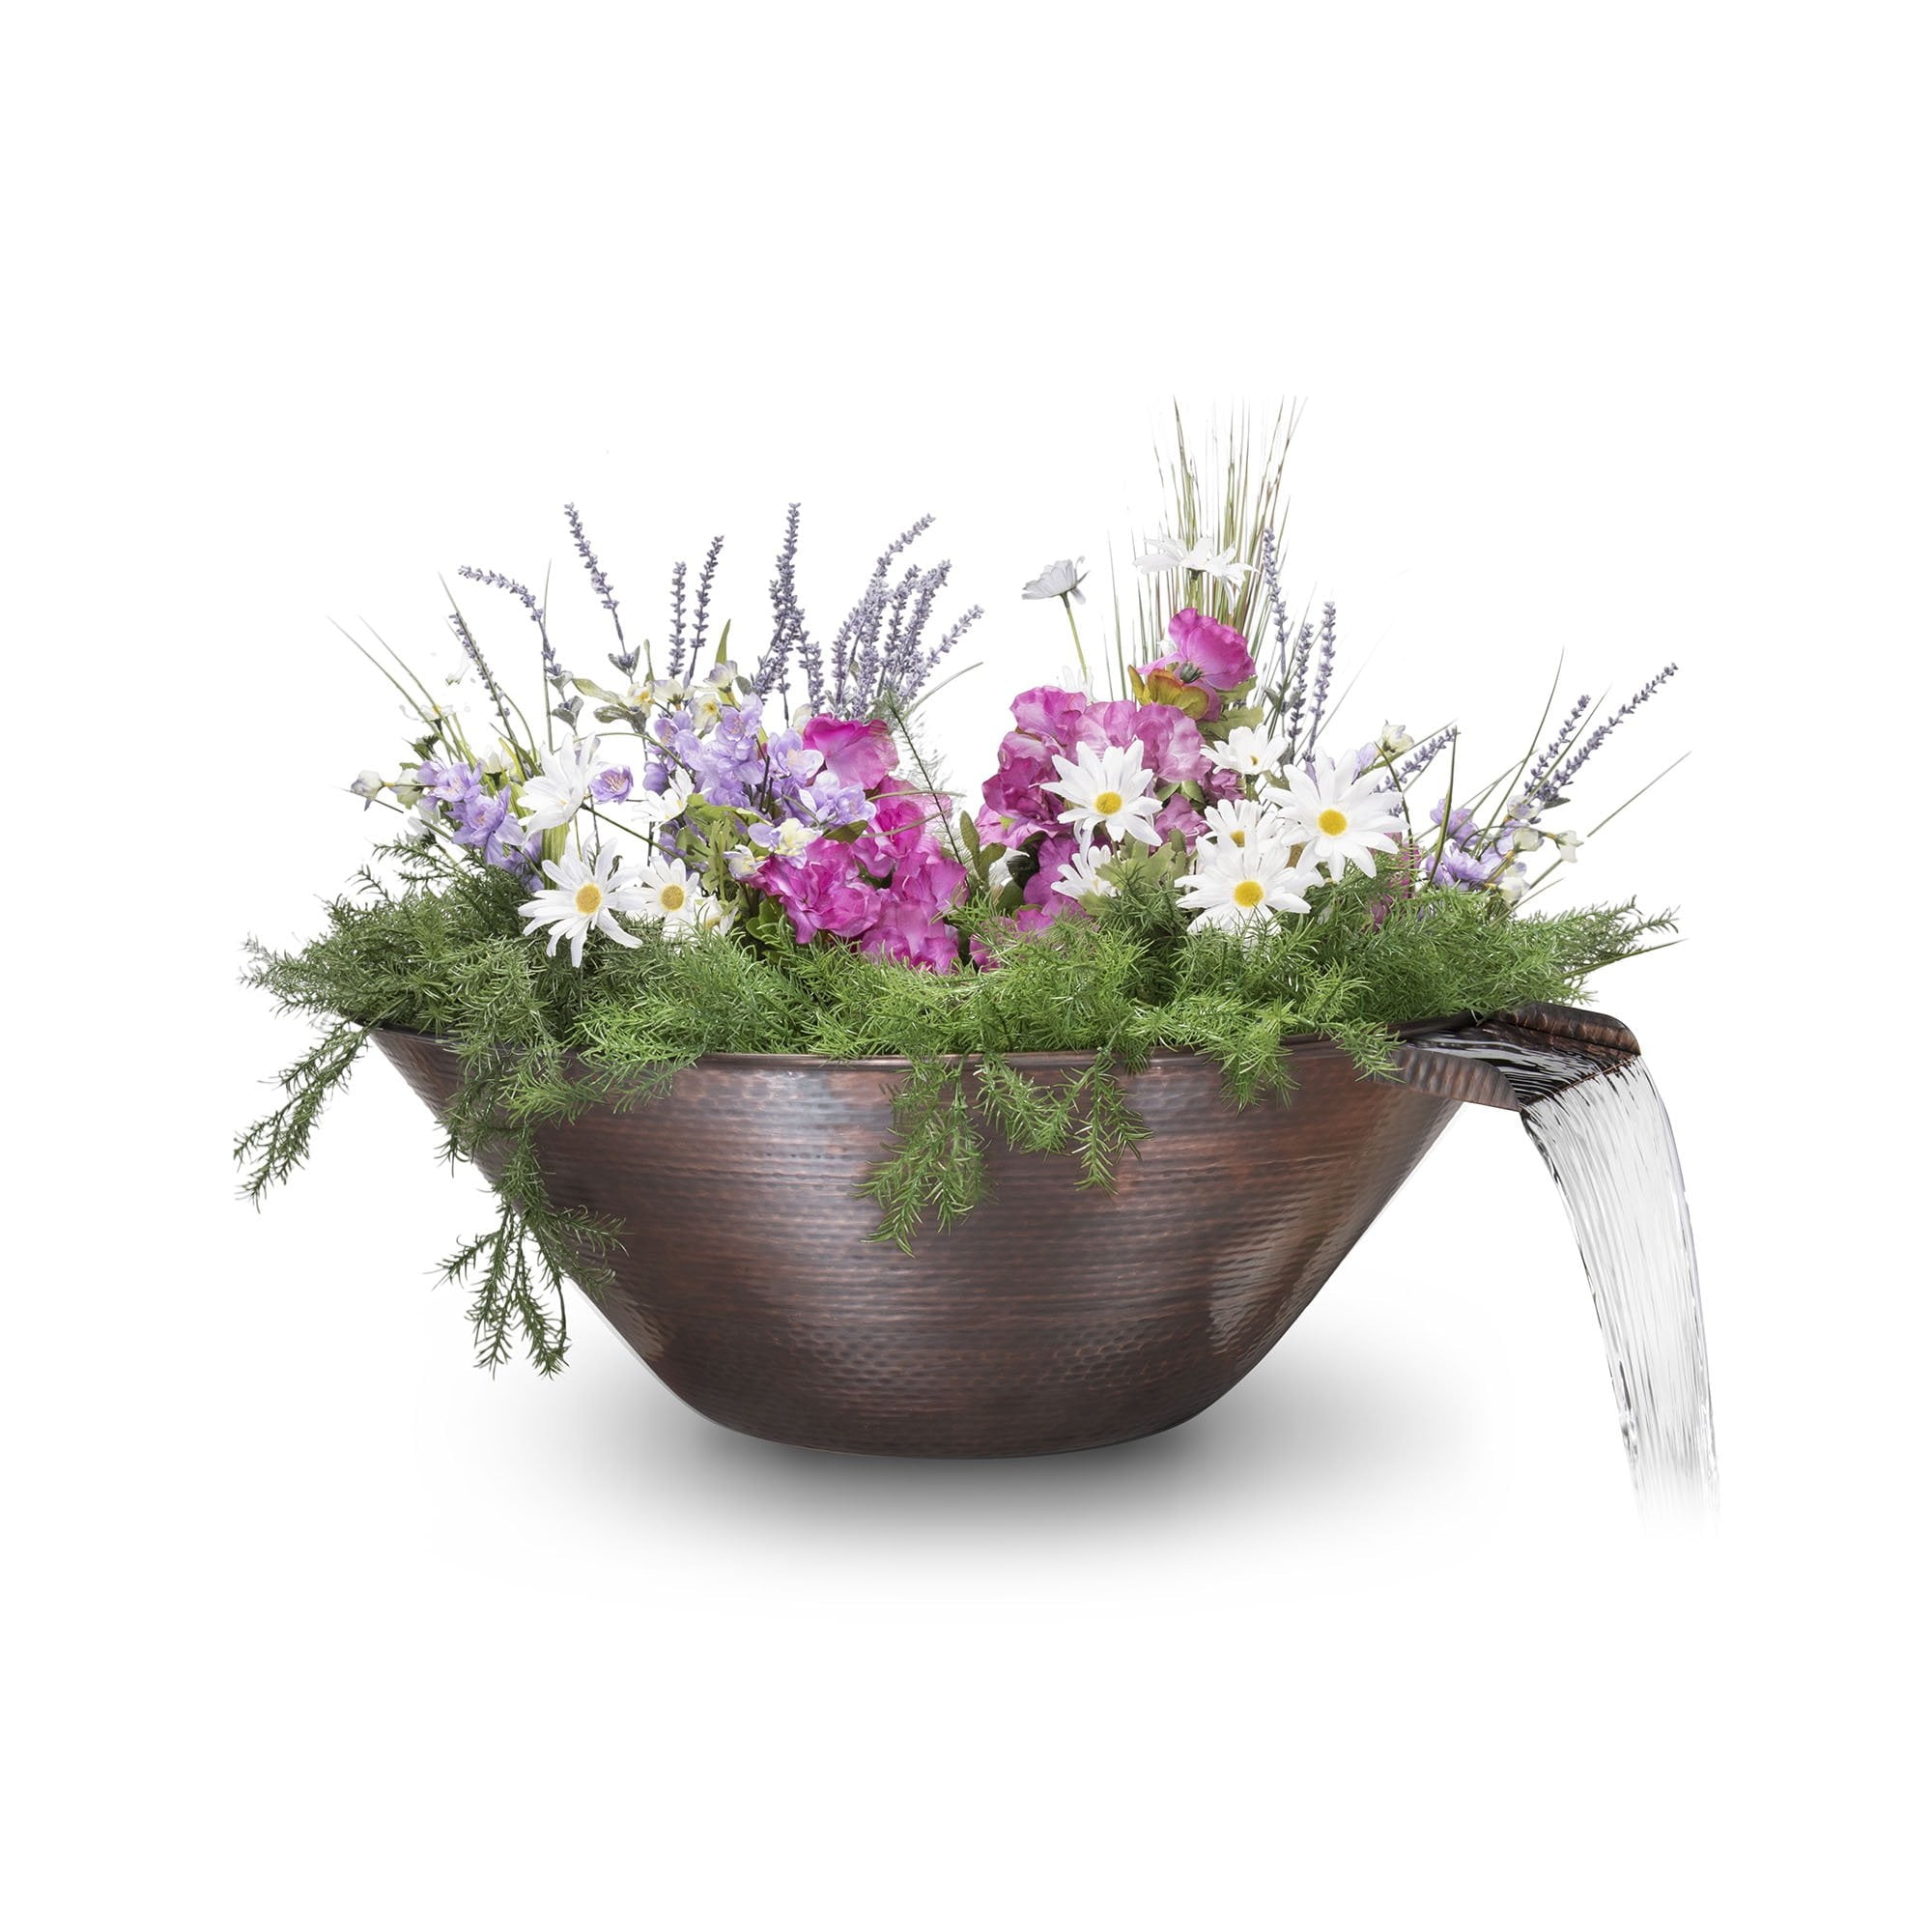 TOP Fires Remi Planter & Water Bowl in Copper by The Outdoor Plus - Majestic Fountains